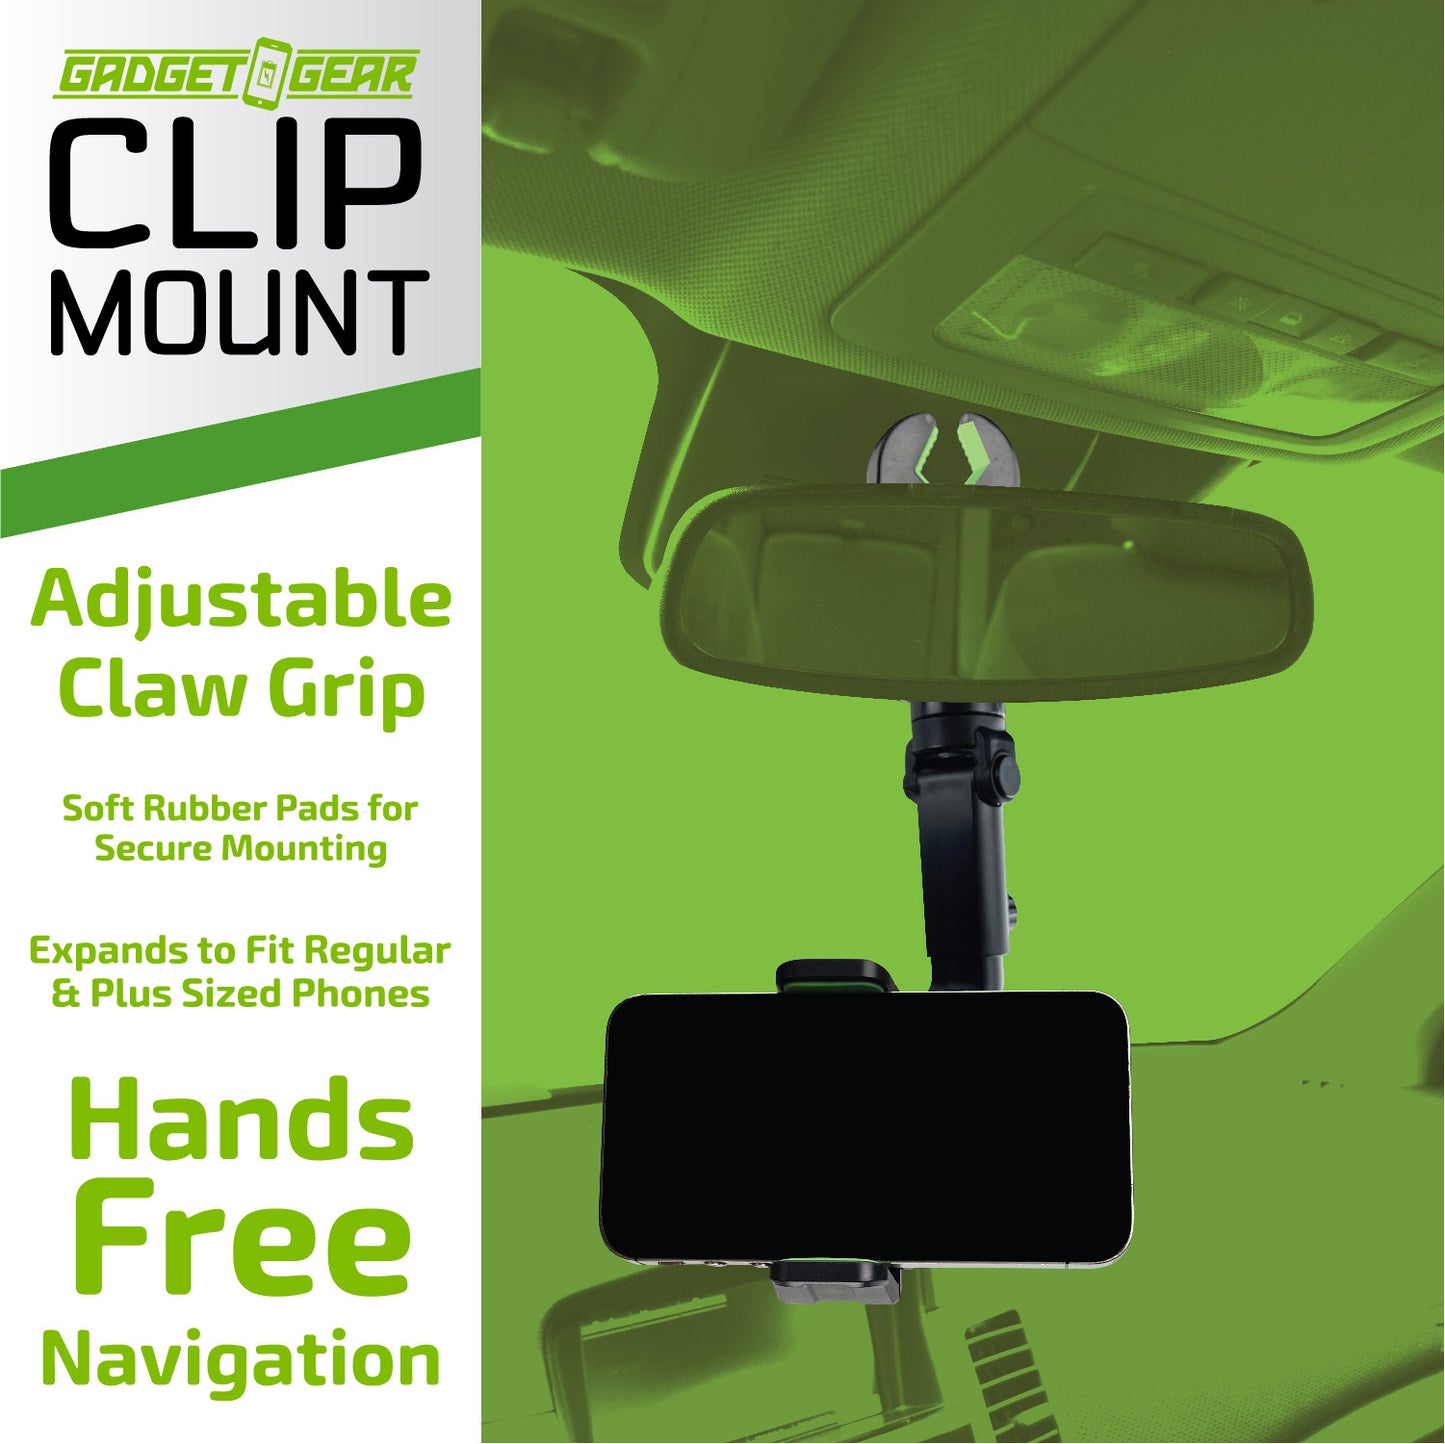 ITEM NUMBER 023717 CLAW CLIP MOUNT 6 PIECES PER DISPLAY